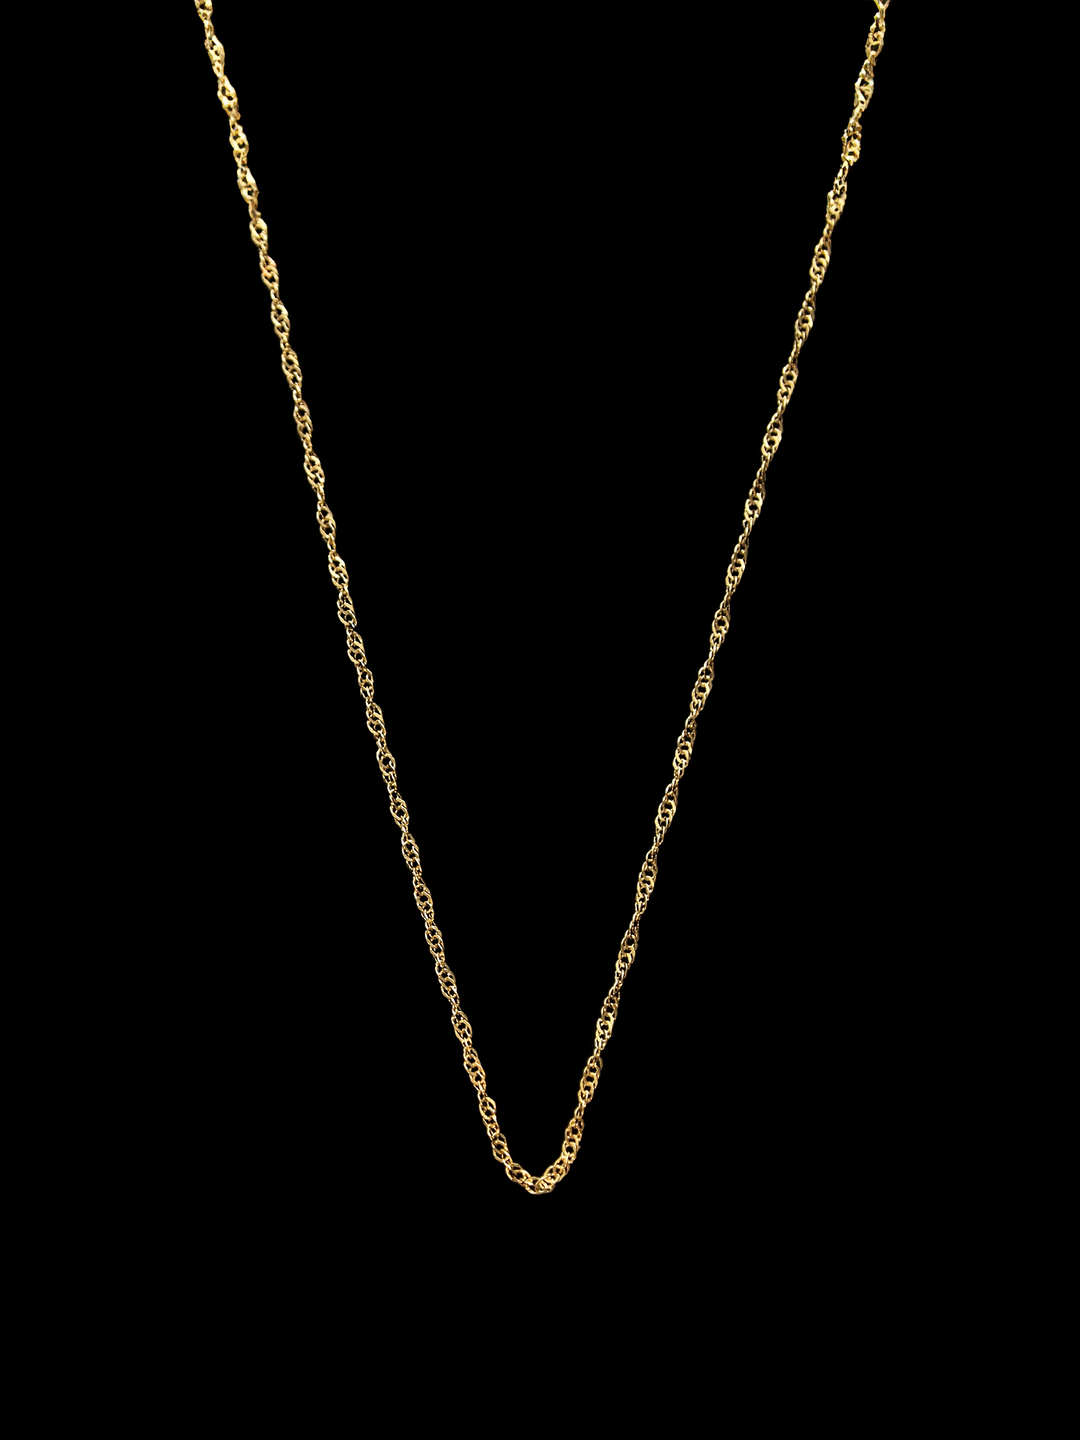 [iErté] "Hemingway" Chain Necklace 40cm / ヘミングウェイ チェーン ネックレス